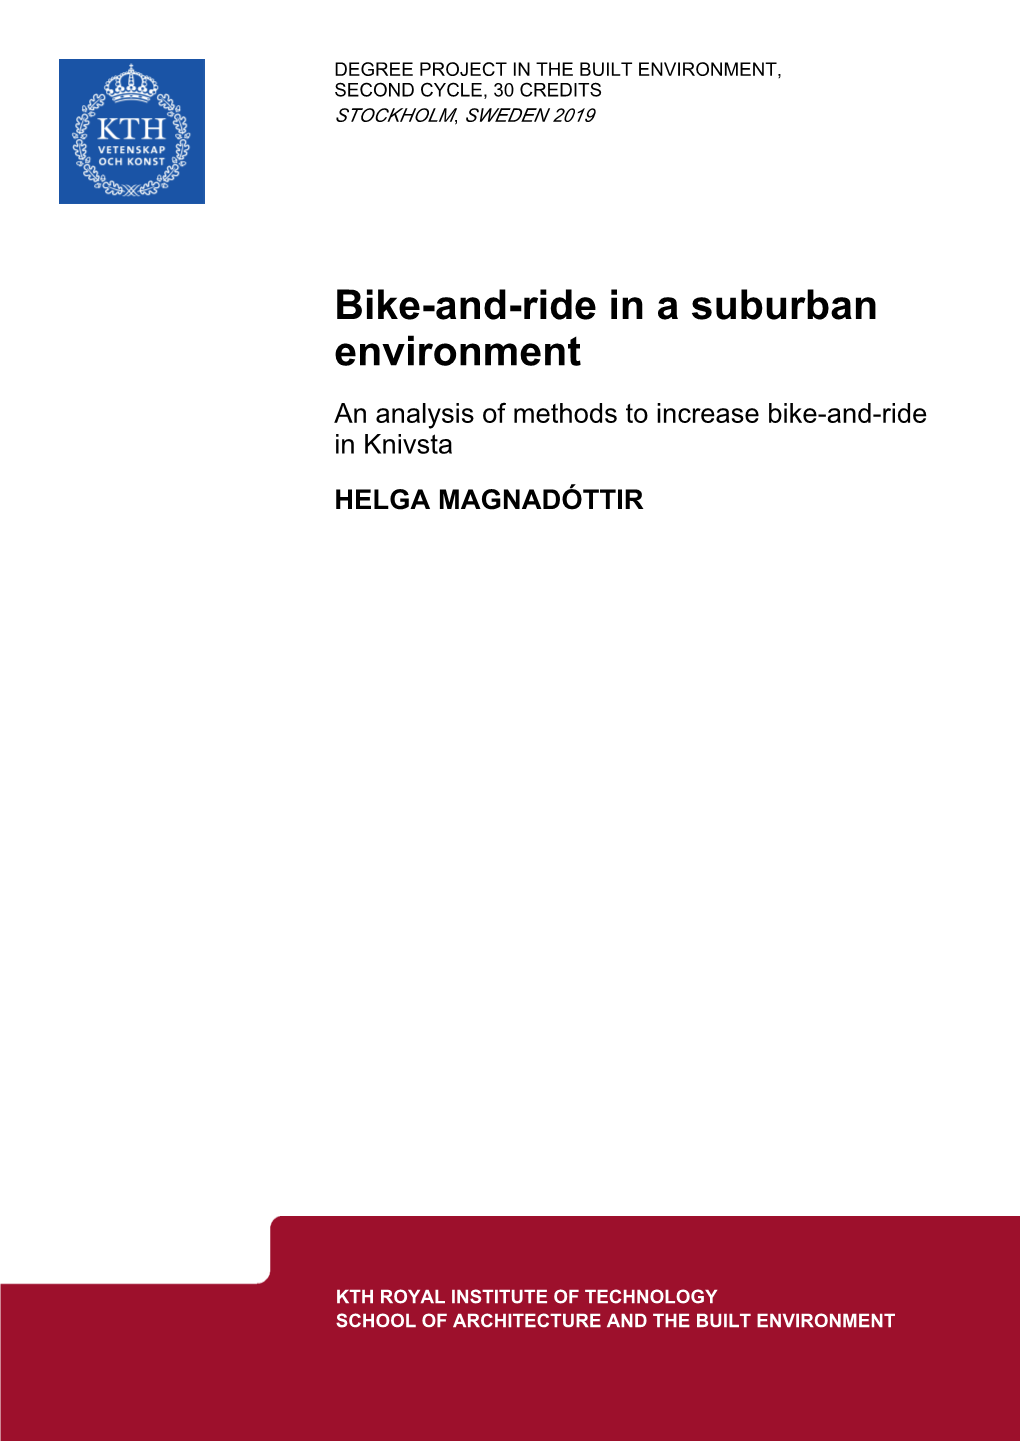 Bike-And-Ride in a Suburban Environment an Analysis of Methods to Increase Bike-And-Ride in Knivsta